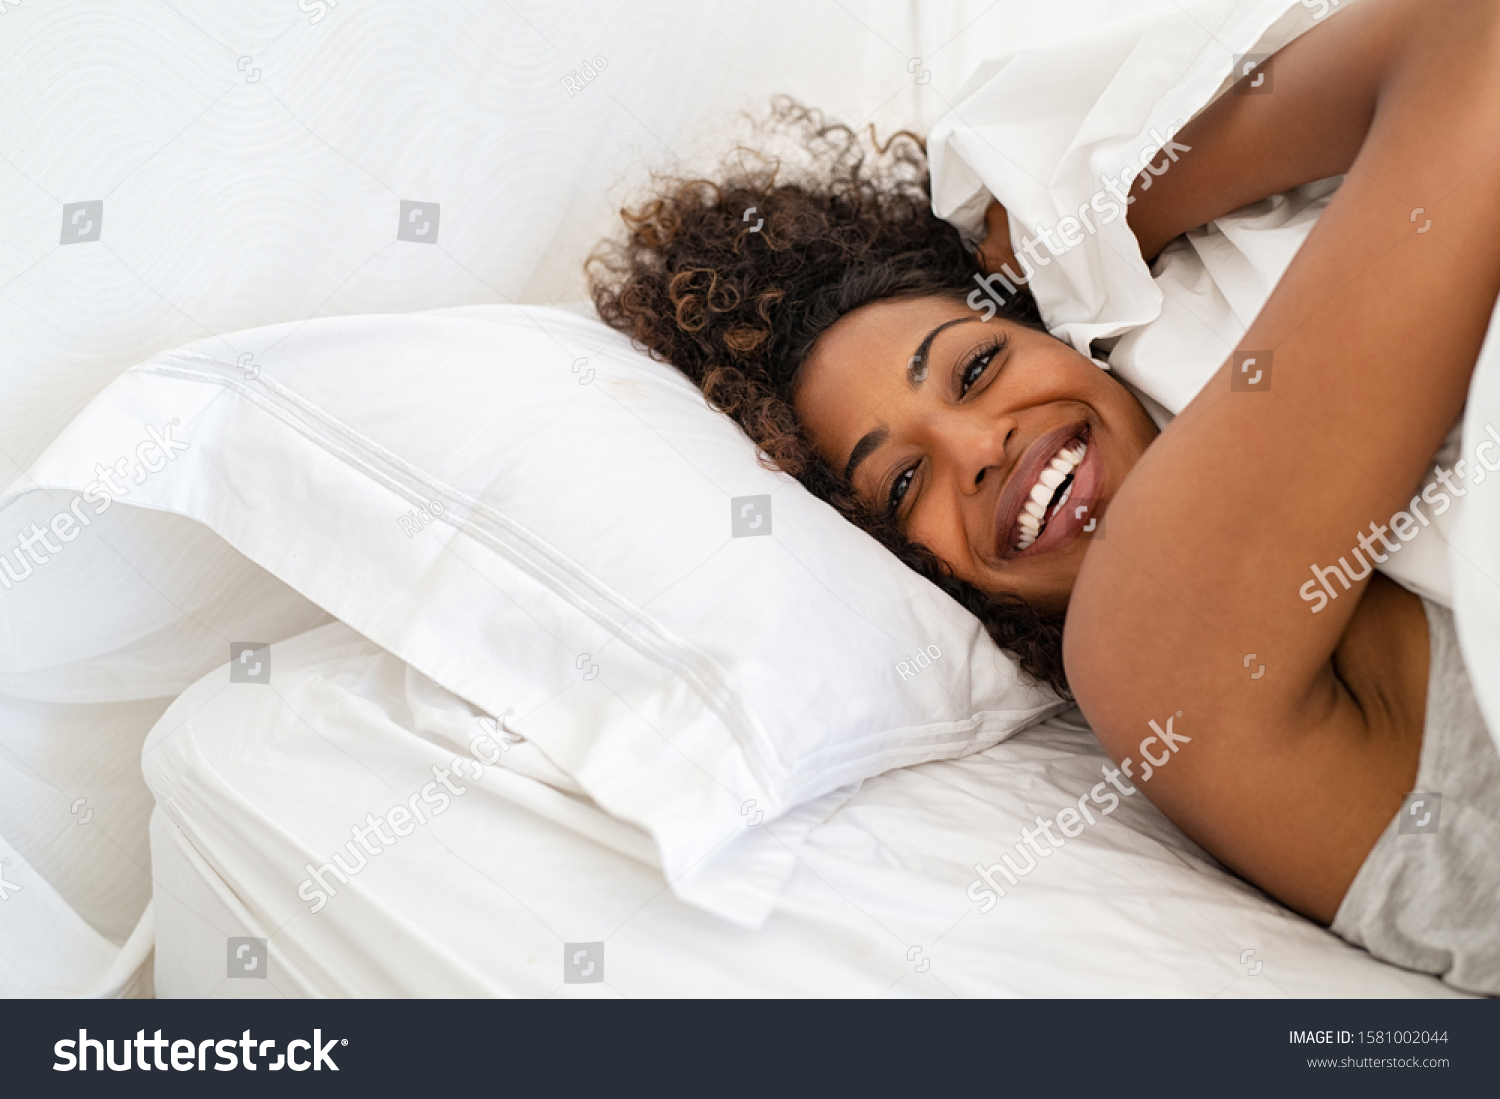 Cheerful young woman lying on bed playing with blanket and looking at camera. African girl feeling fresh after nap on bed with copy space. Laughing woman having fun while embracing pillow and blanket. #1581002044